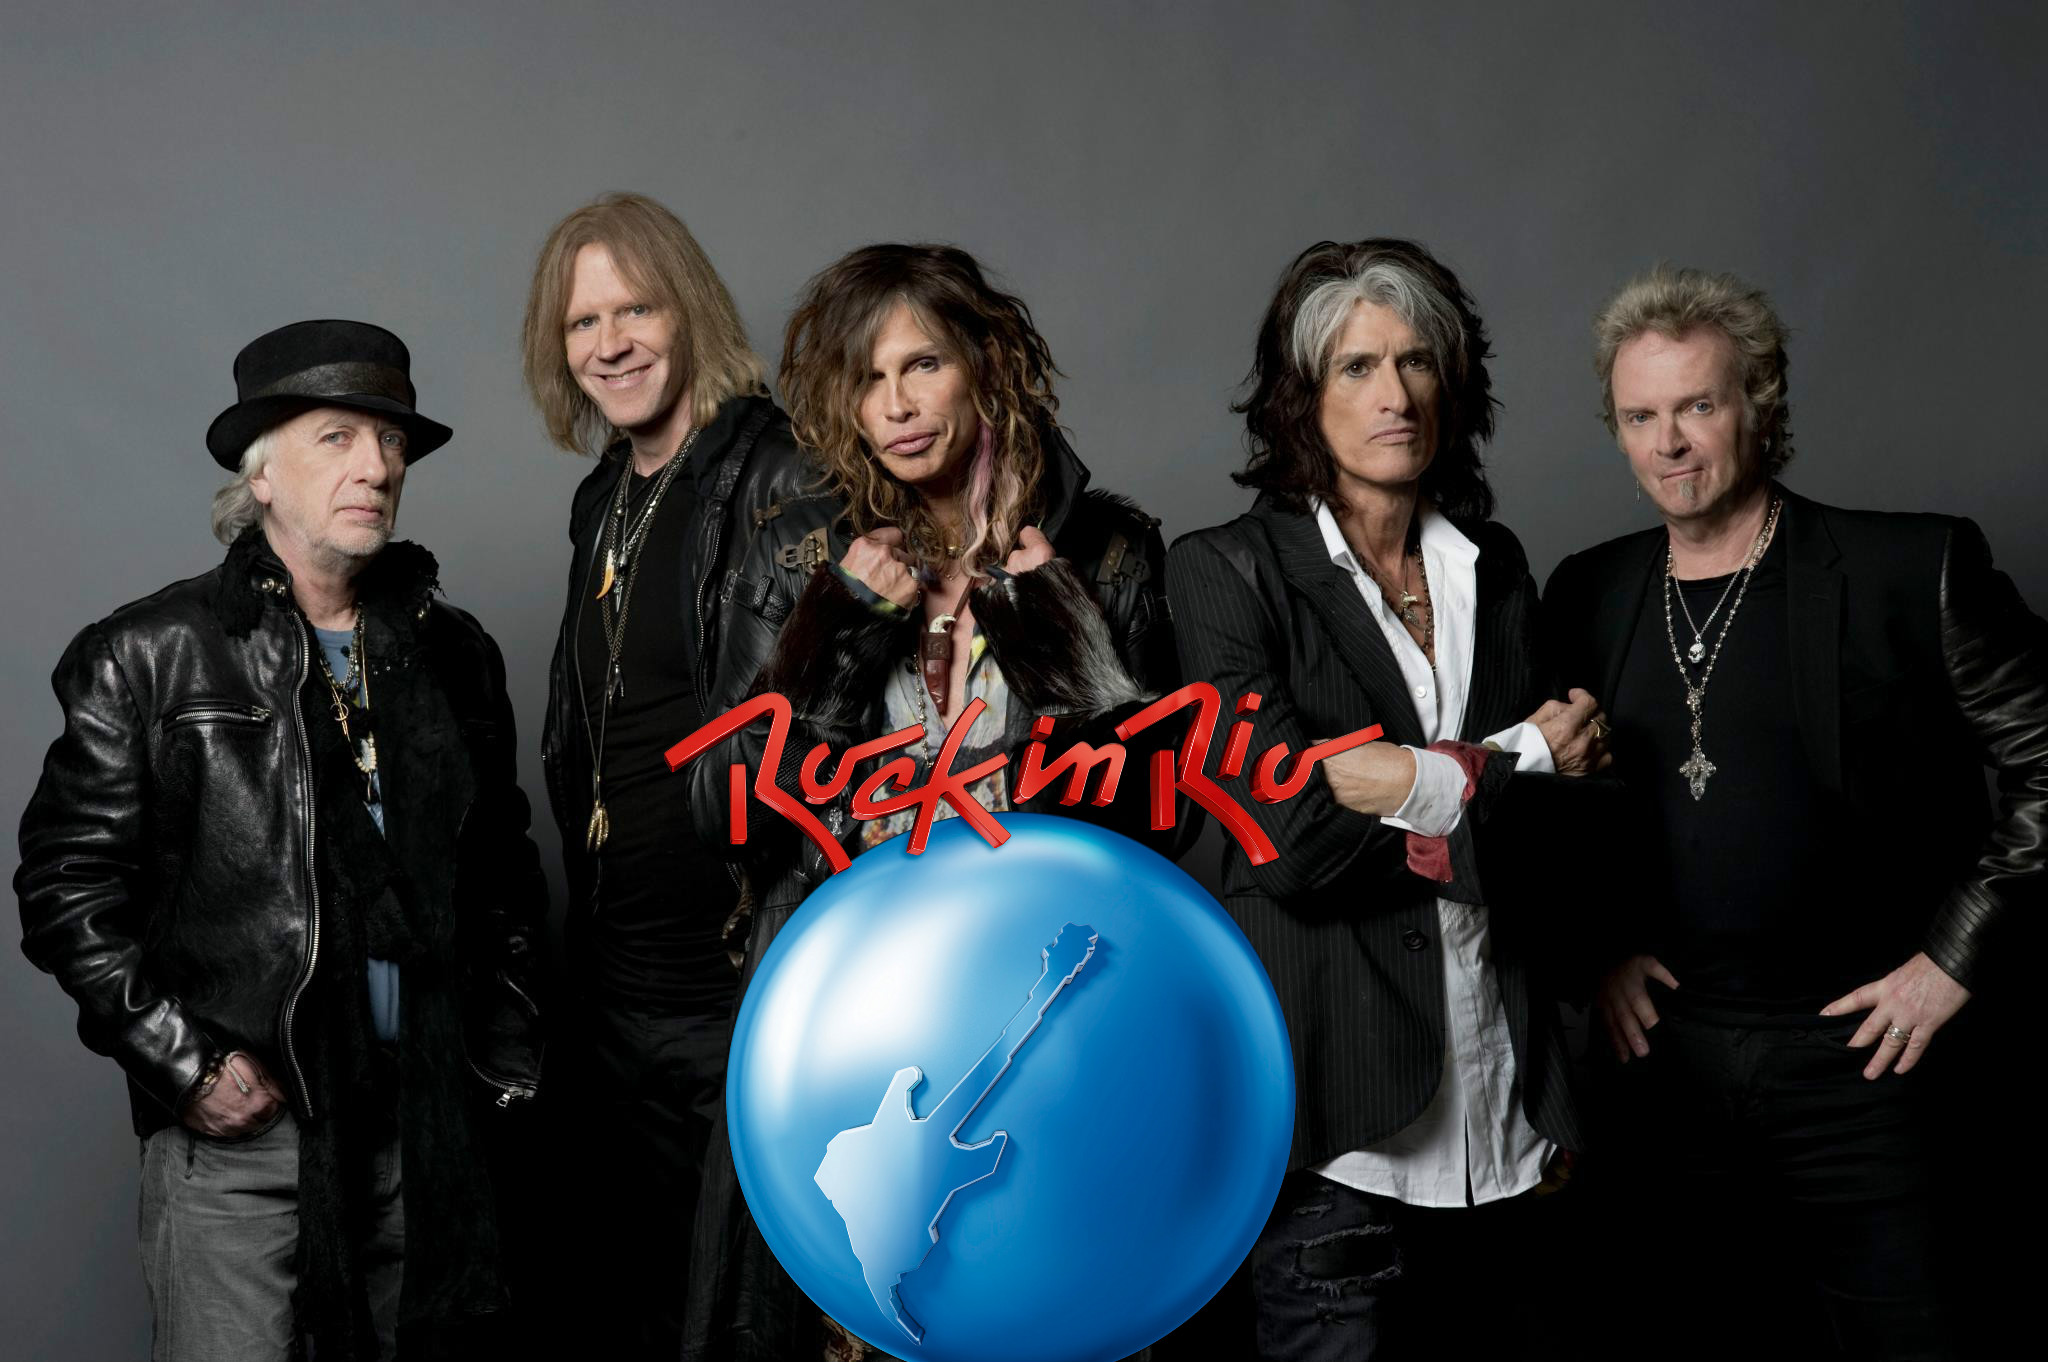 Watch Aerosmith live on Rock In Rio right now!